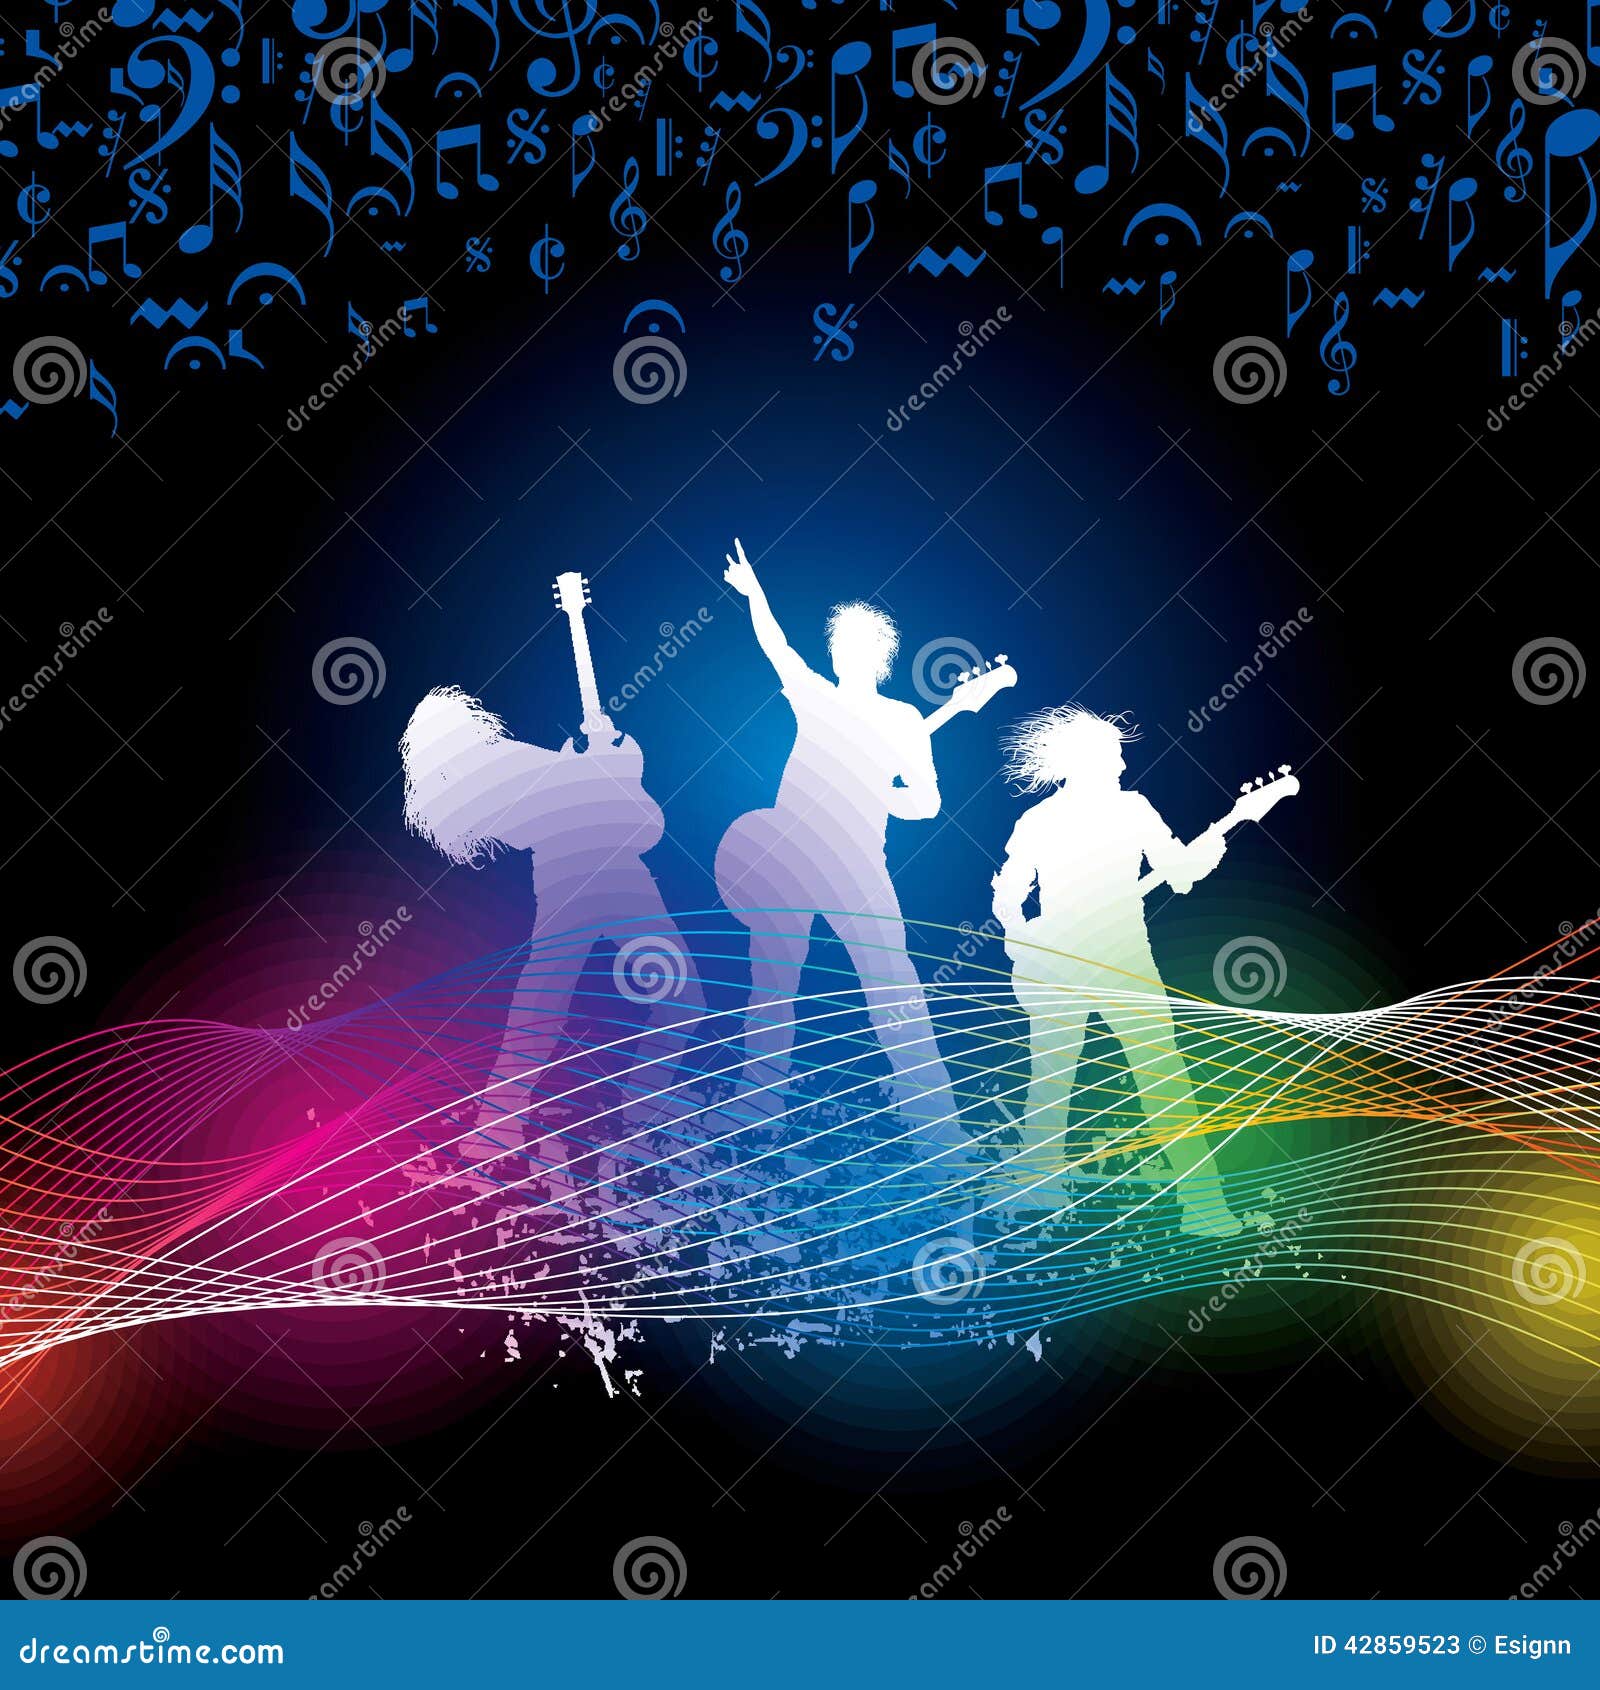 Illustration of Band of Musician Performing Stock Vector - Illustration ...